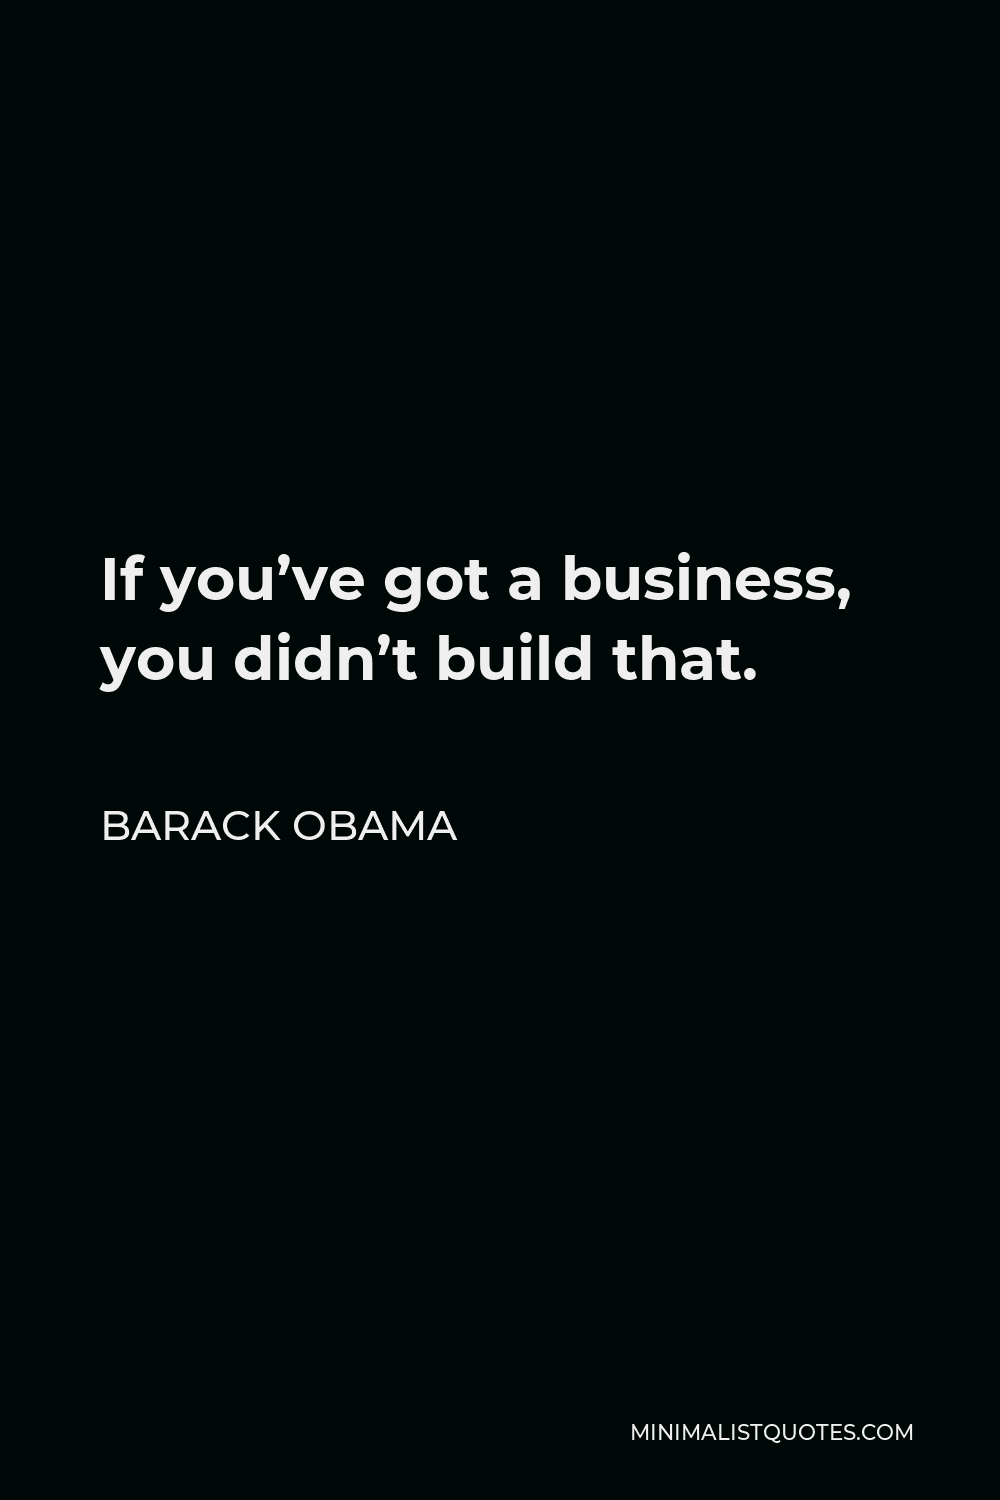 Barack Obama Quote - If you’ve got a business, you didn’t build that.